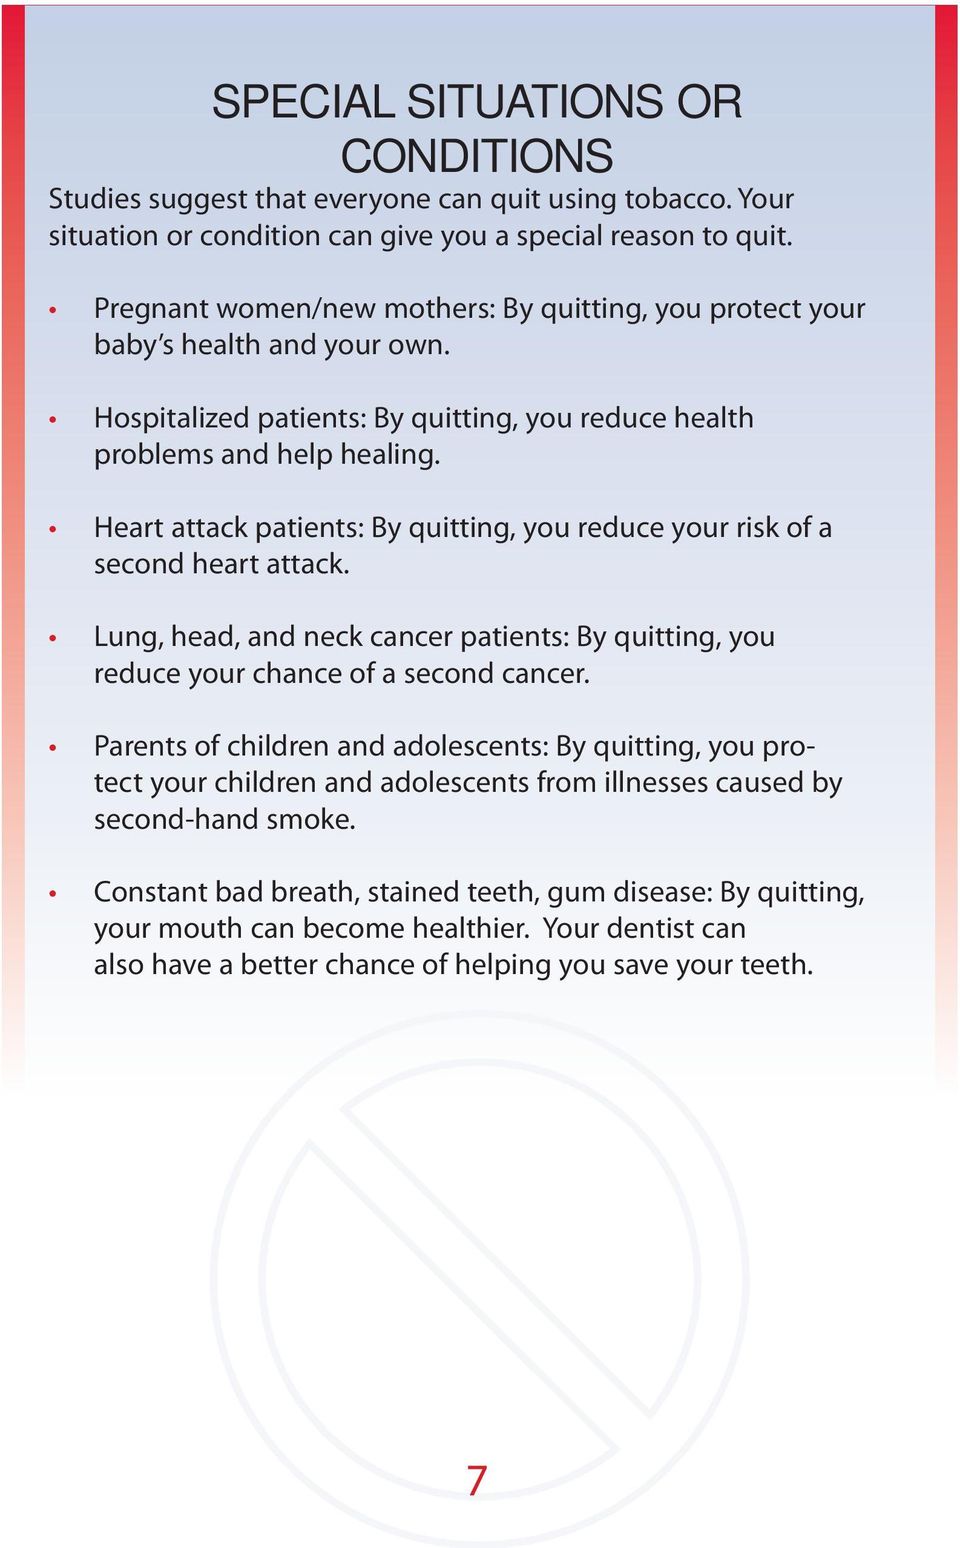 Heart attack patients: By quitting, you reduce your risk of a second heart attack. Lung, head, and neck cancer patients: By quitting, you reduce your chance of a second cancer.